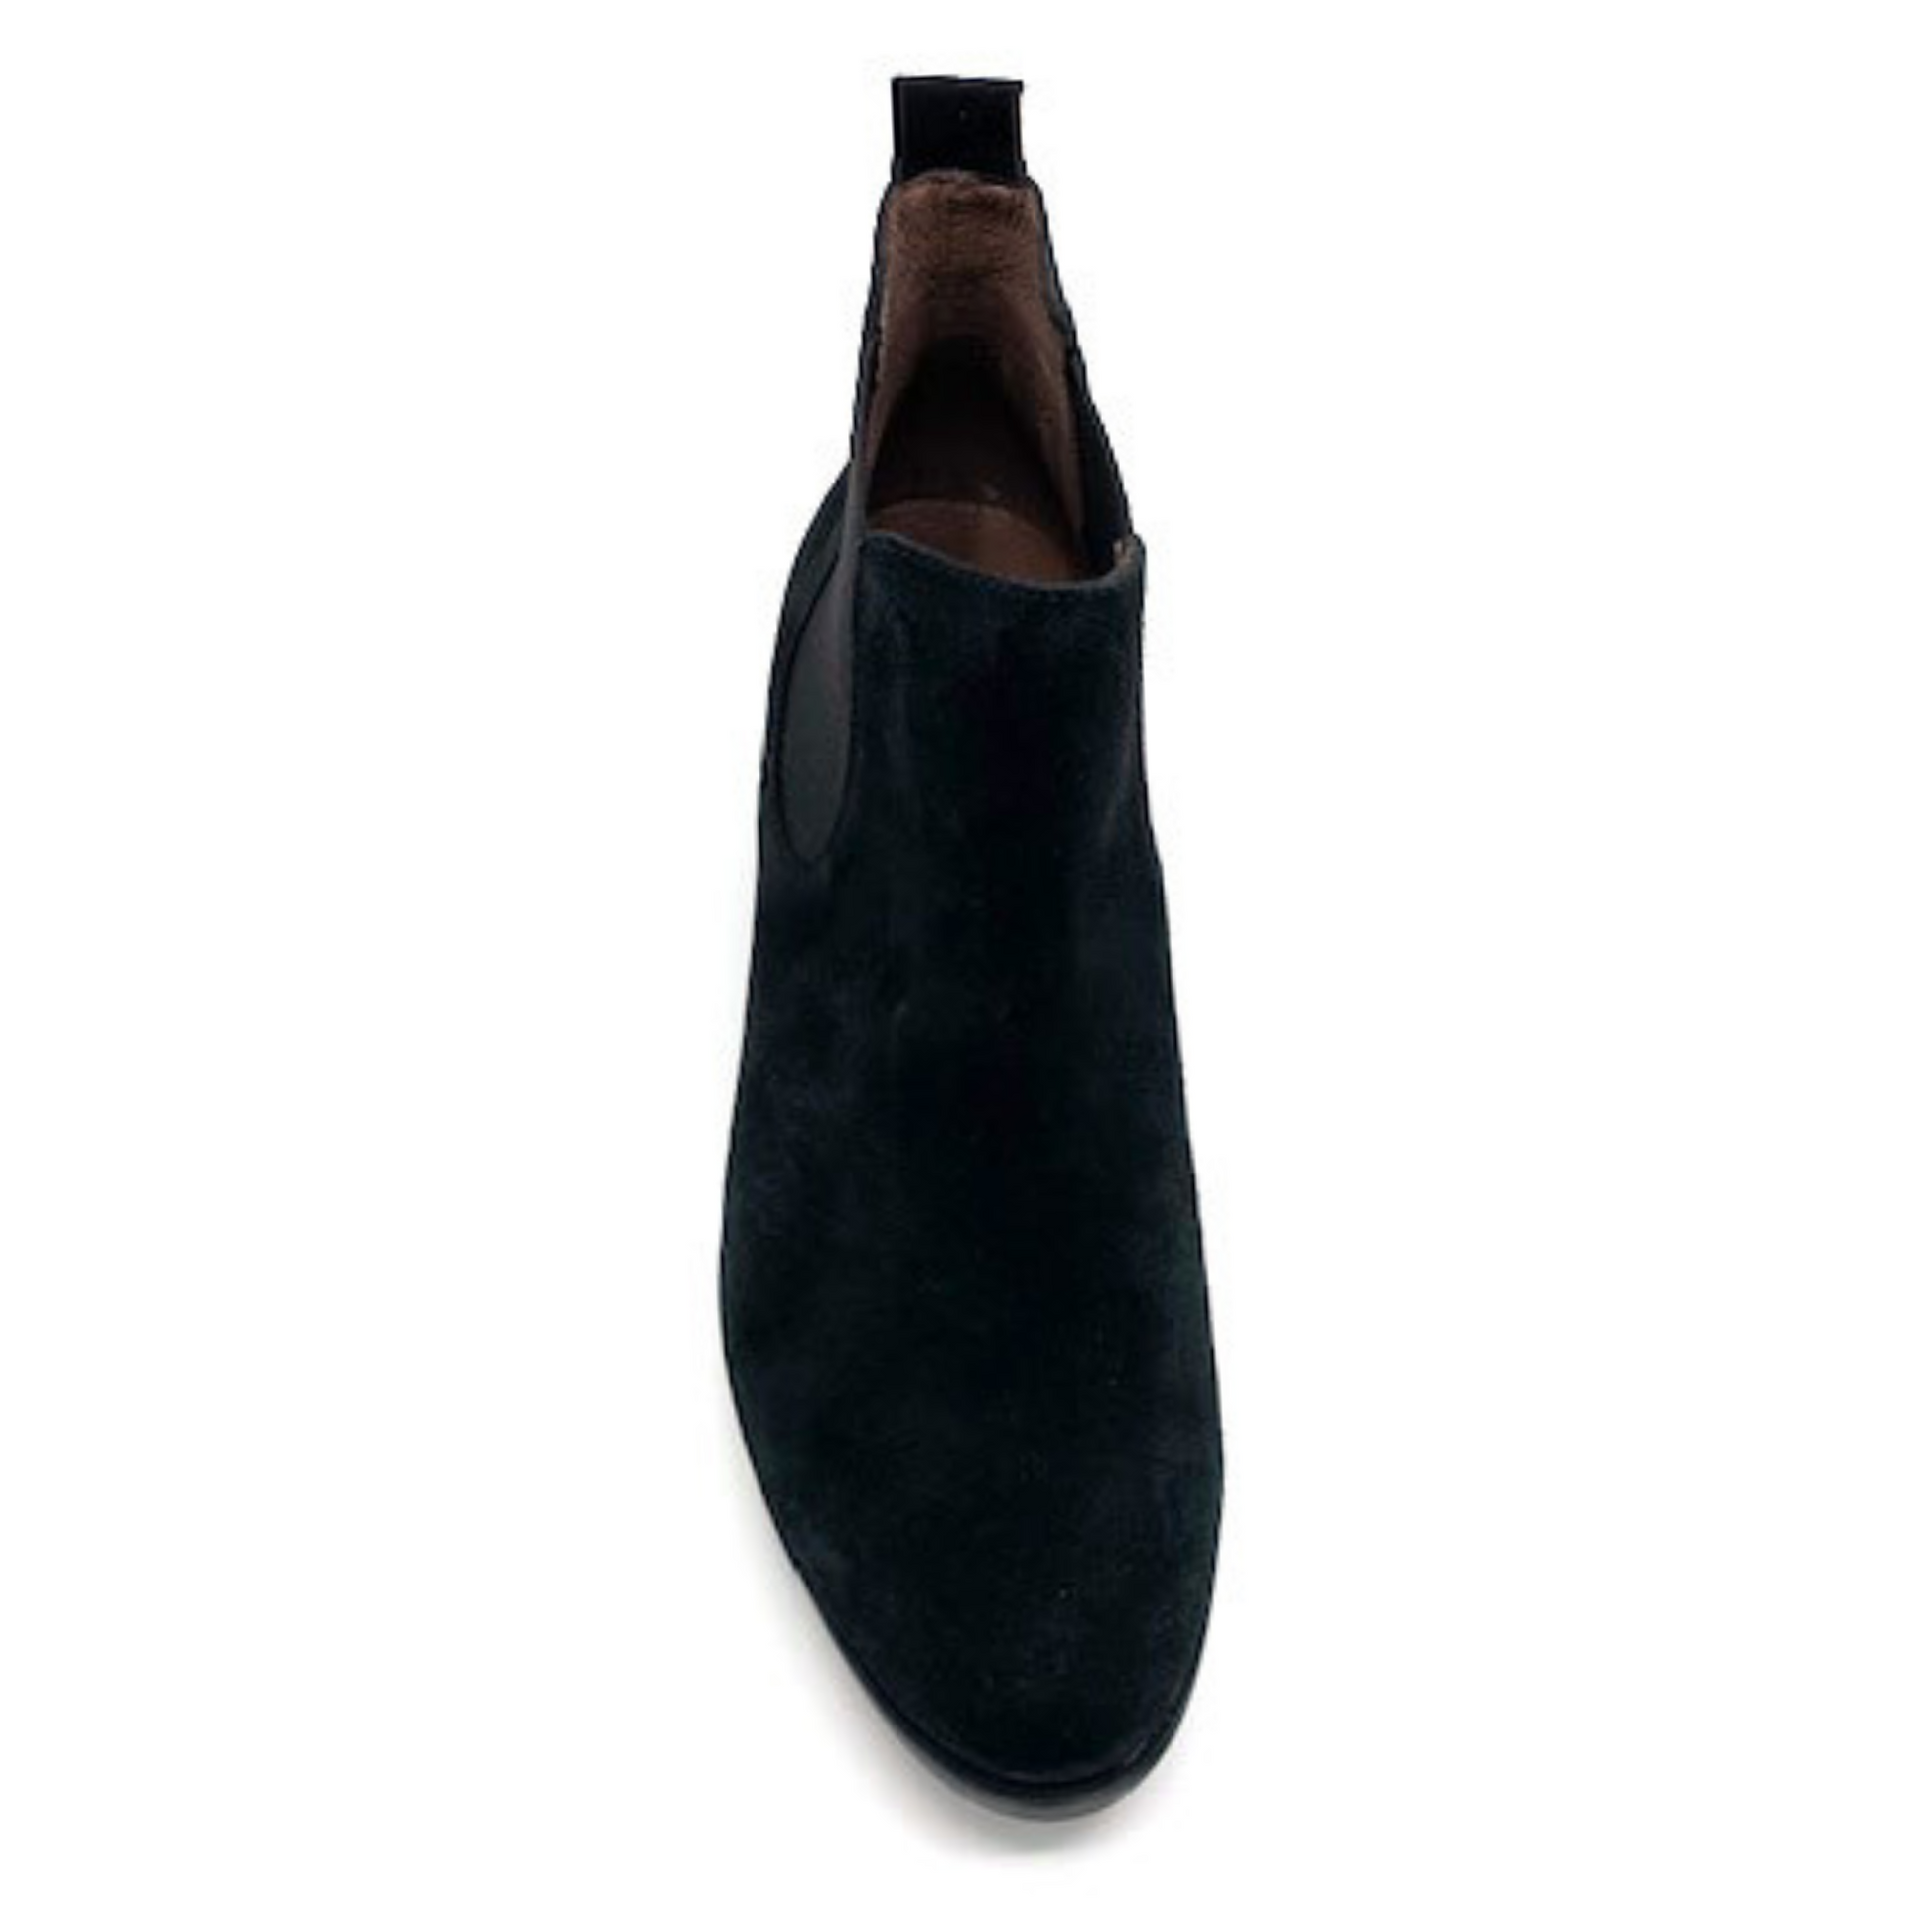 The top of the suede black boot is pictured, showing a slightly pointed toe and heel tab.